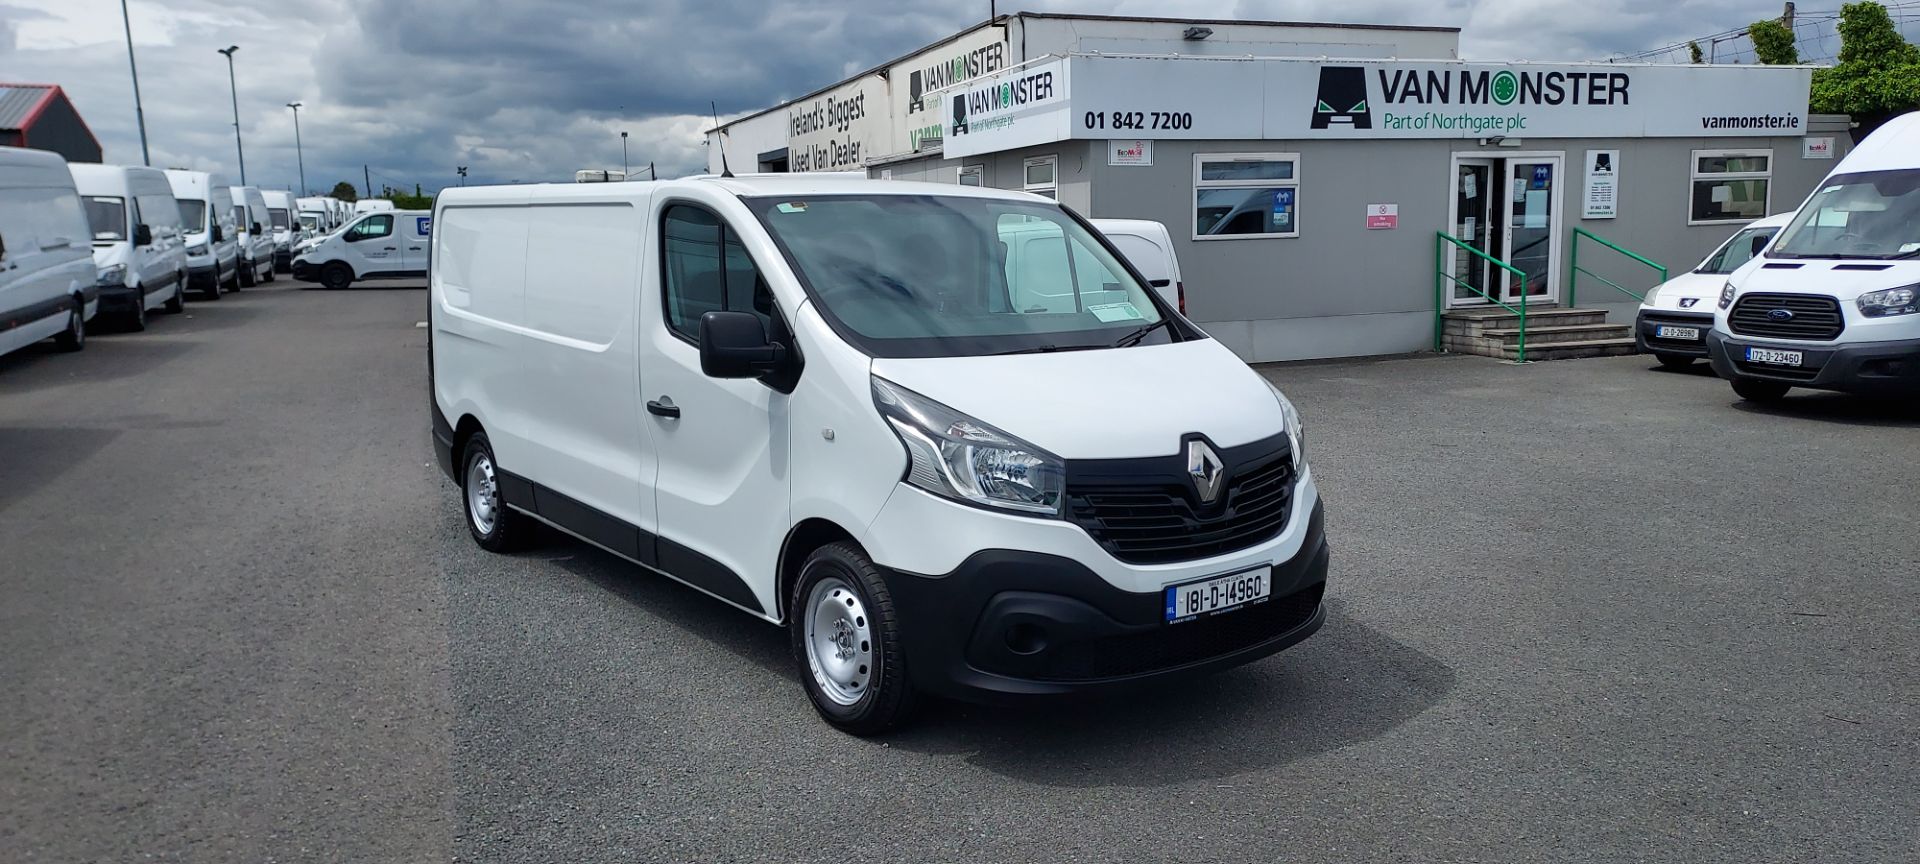 2018 Renault Trafic LL29 DCI 120 Business 3DR (181D14960) Thumbnail 1